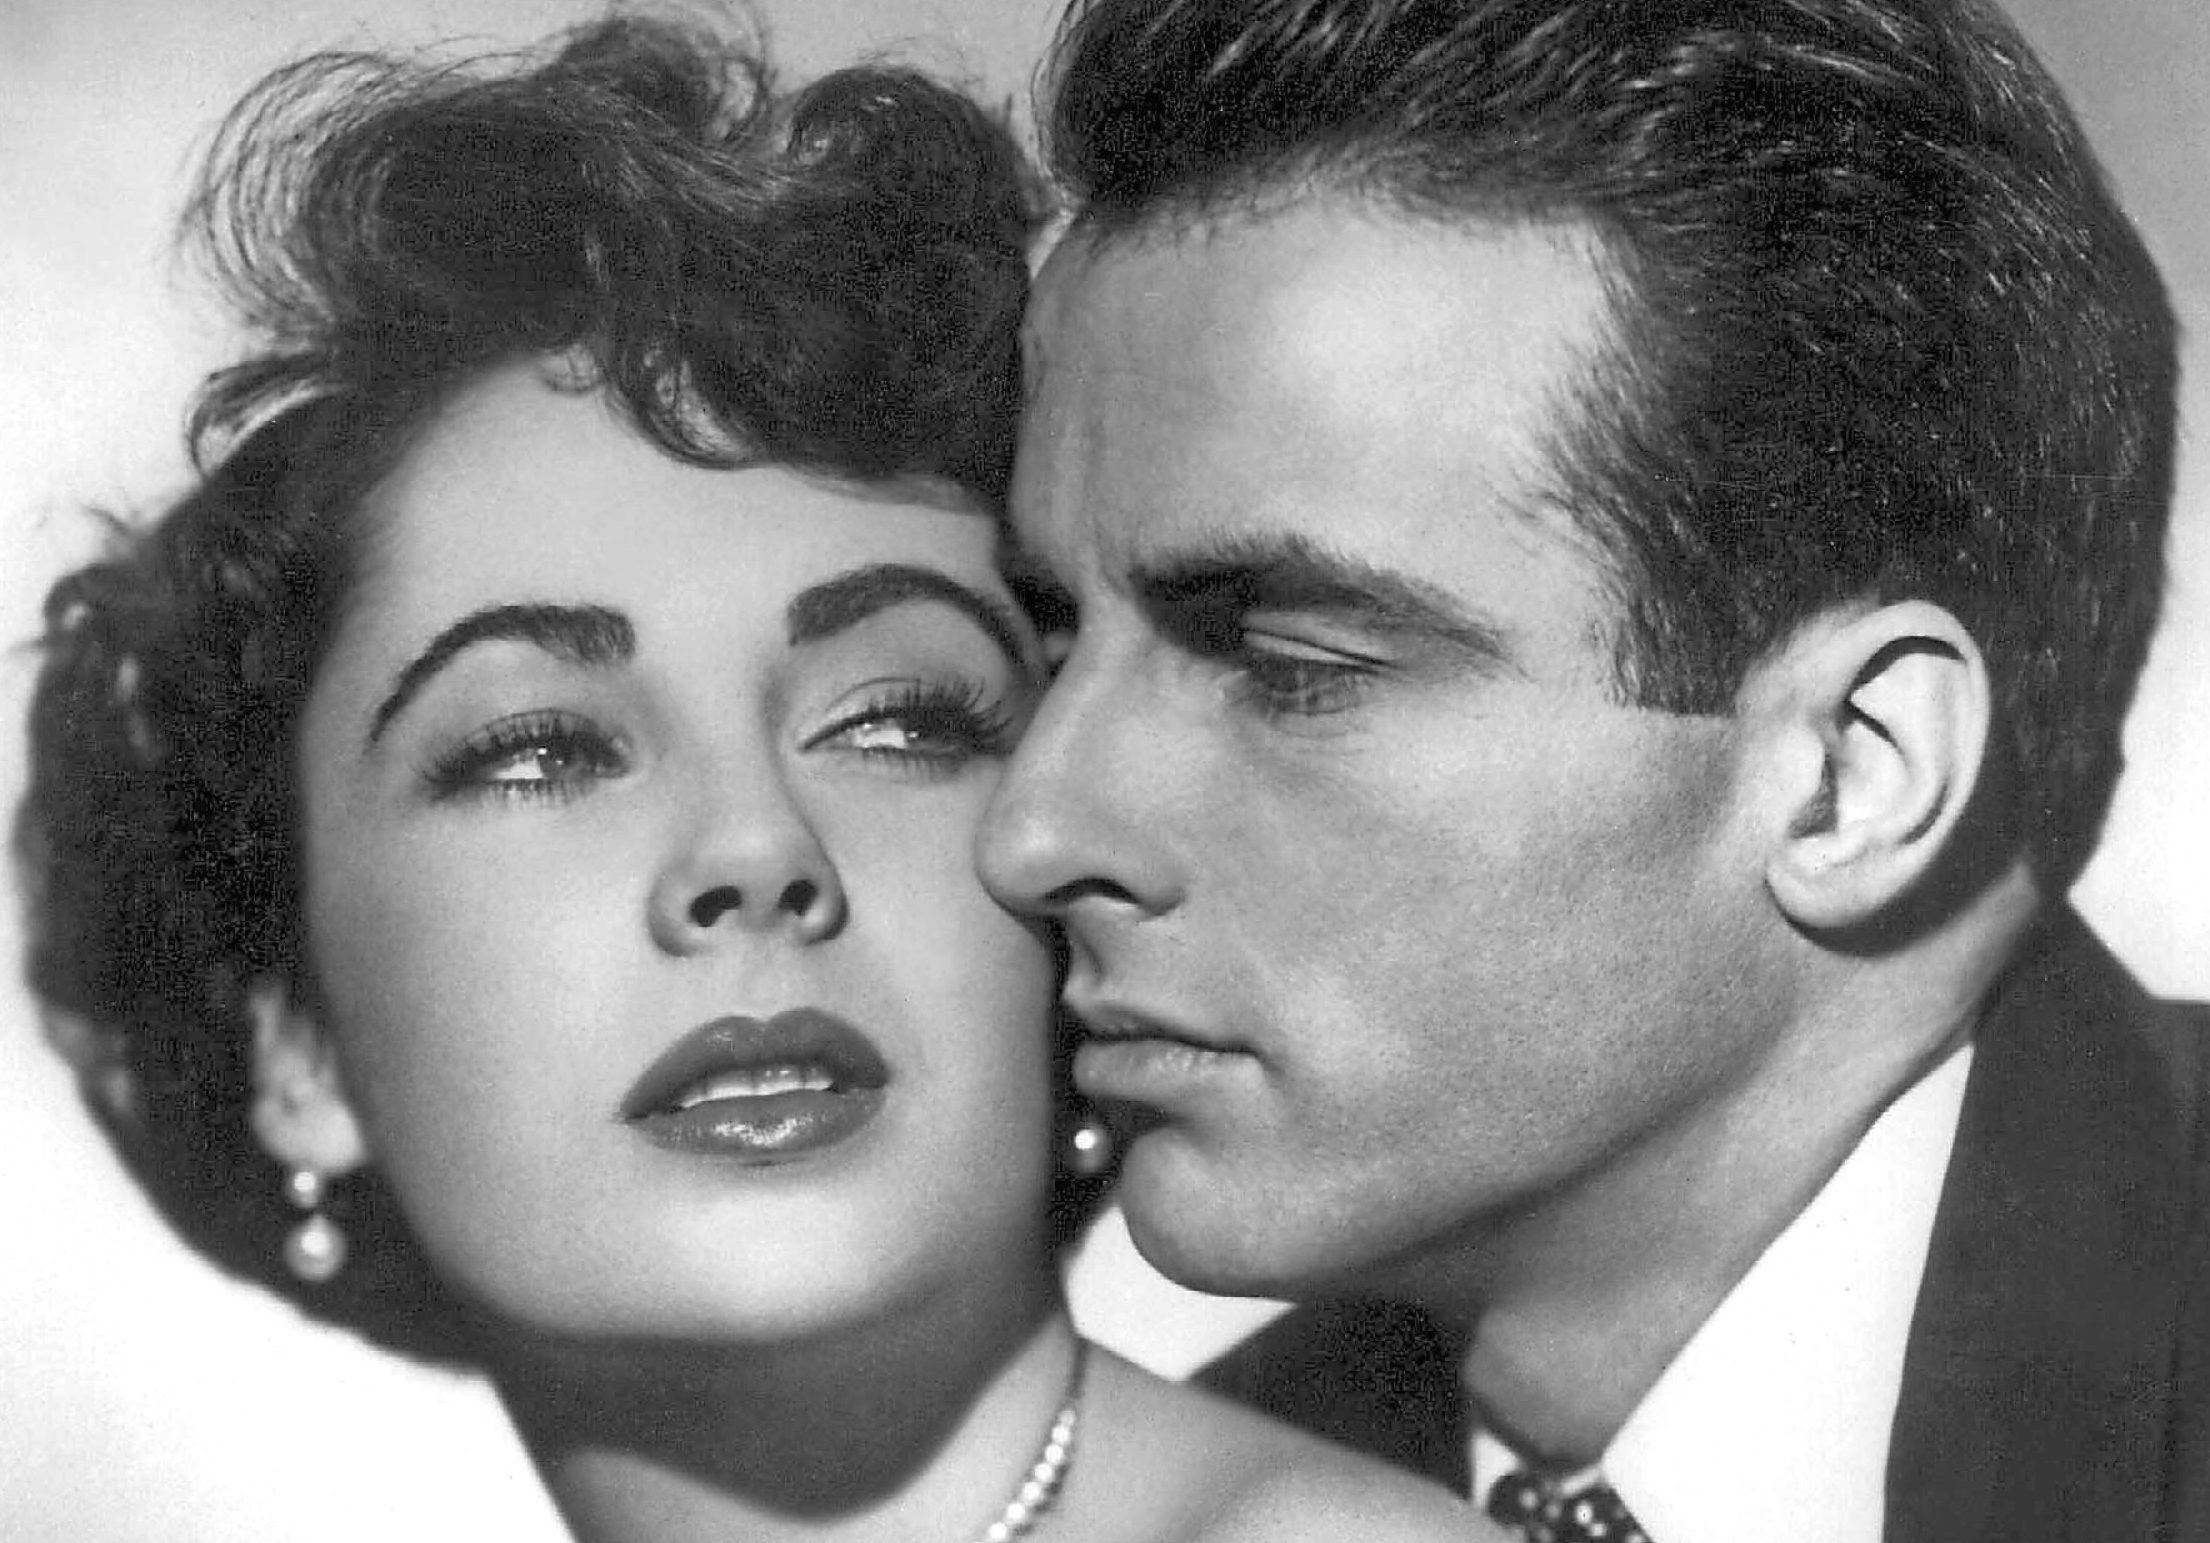 Elizabeth Taylor alongside Montgomery Clift in A Place in the Sun 
(Allstar/PARAMOUNT)